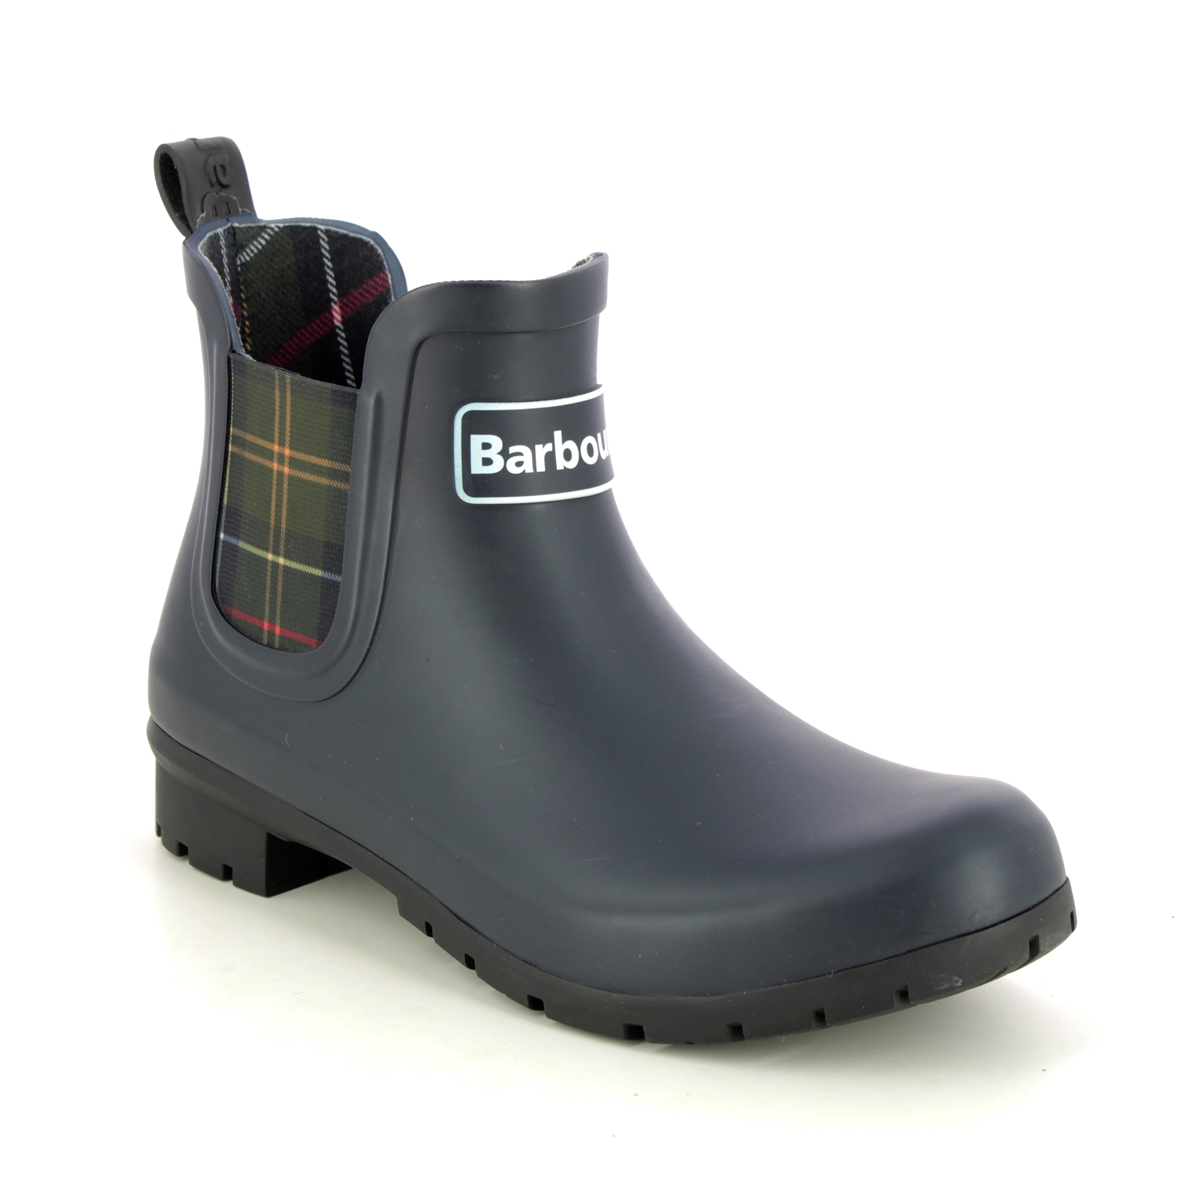 Barbour Kingham Wellie Navy Boots Lrf0088-Ny11 In Size 7 In Plain Navy